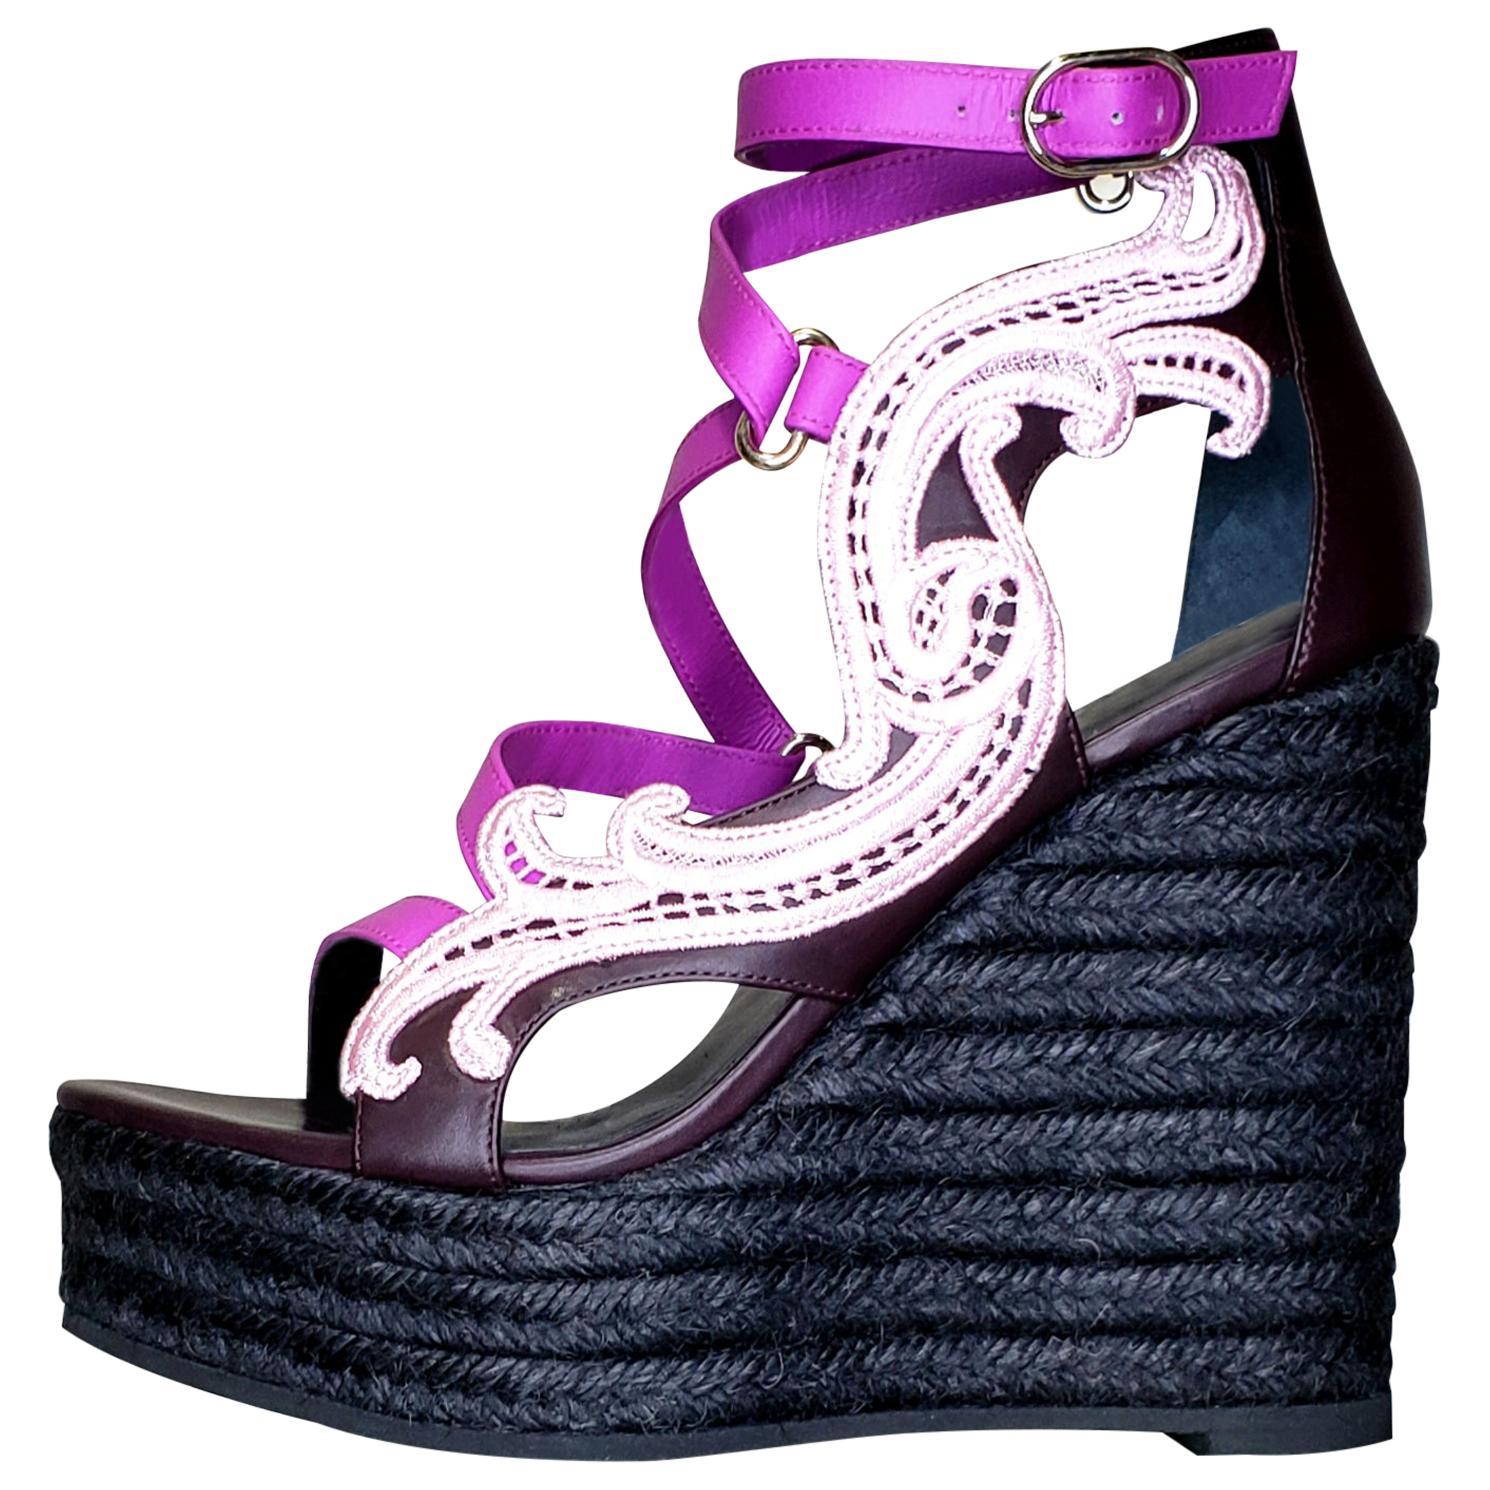 NEW VERSACE PURPLE LEATHER and PINK LACE WEDGE SANDALS 37, 37.5, 38.5 For Sale